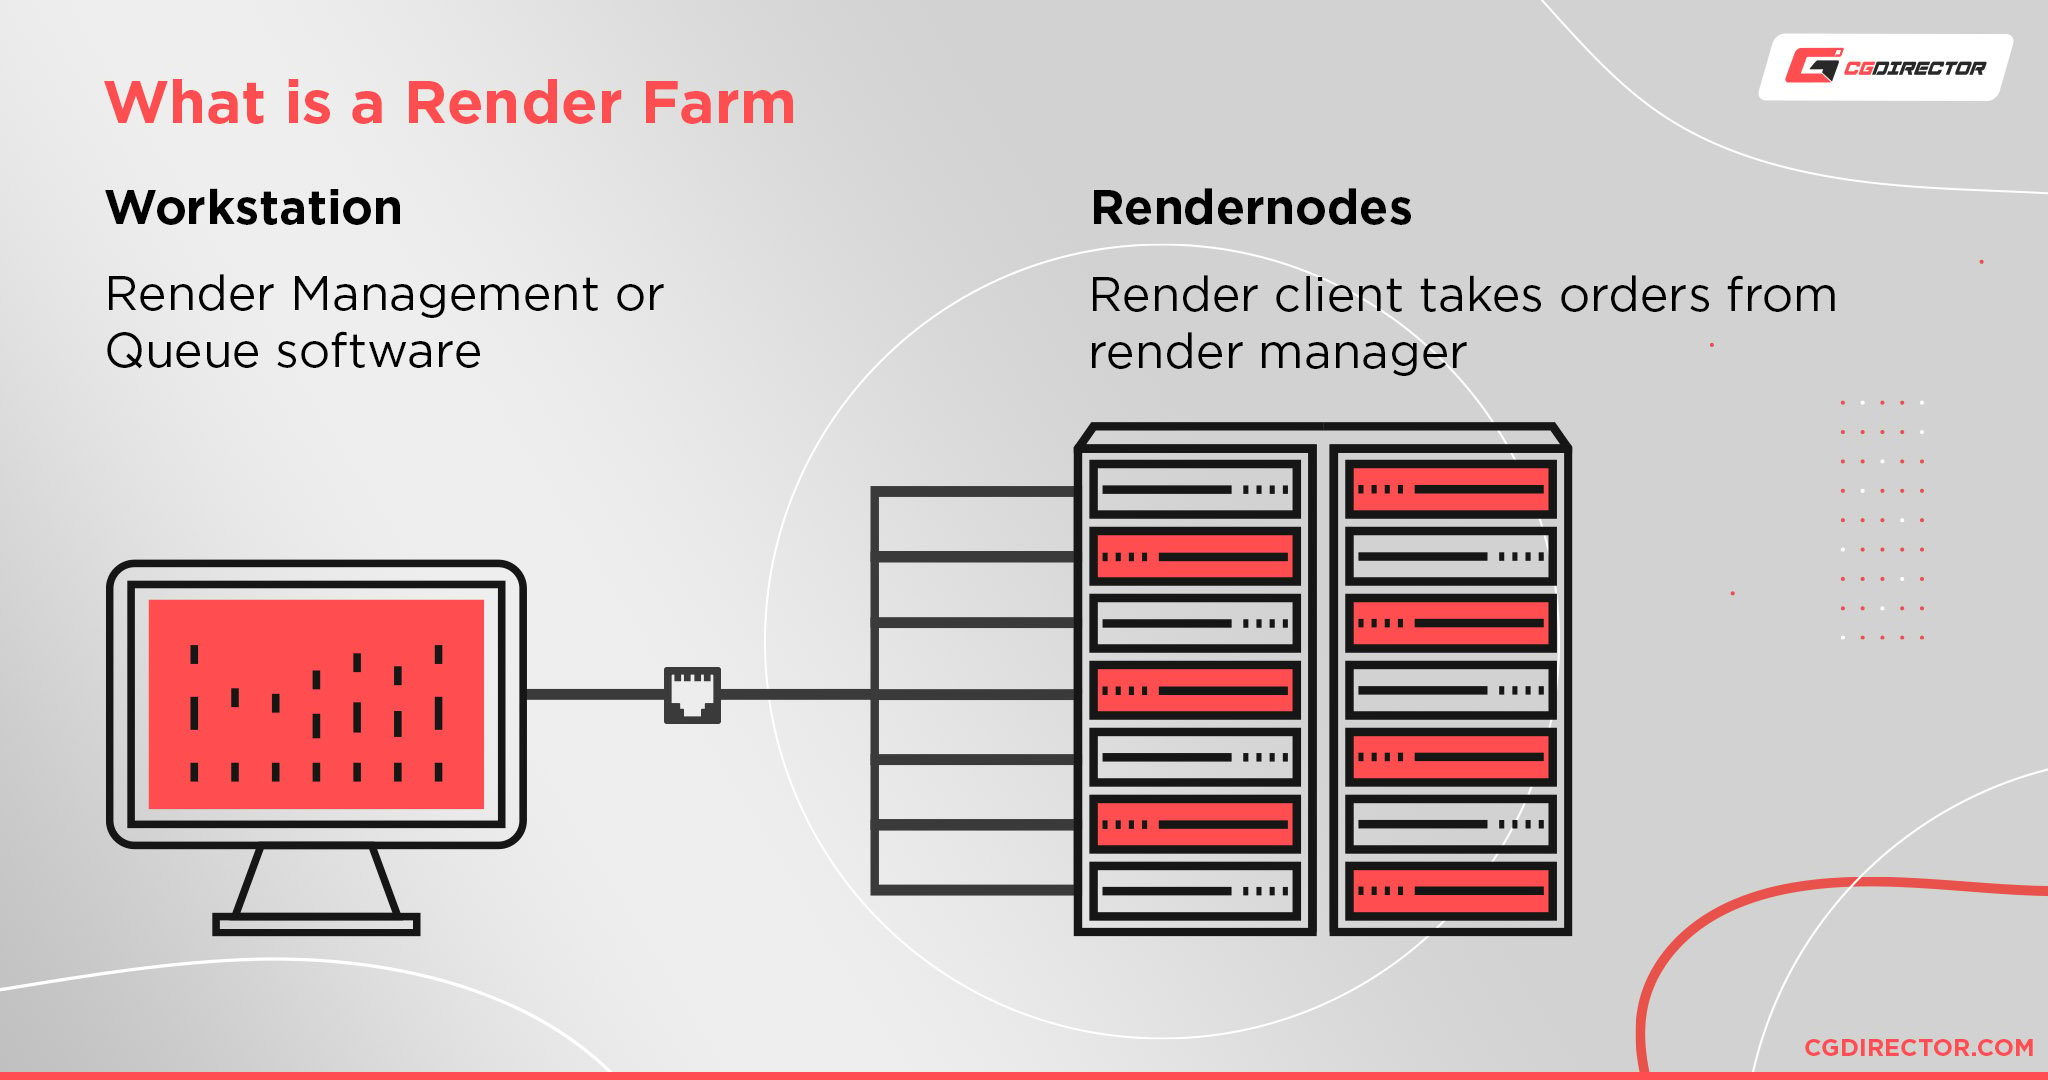 How To Build Your Own Render Farm